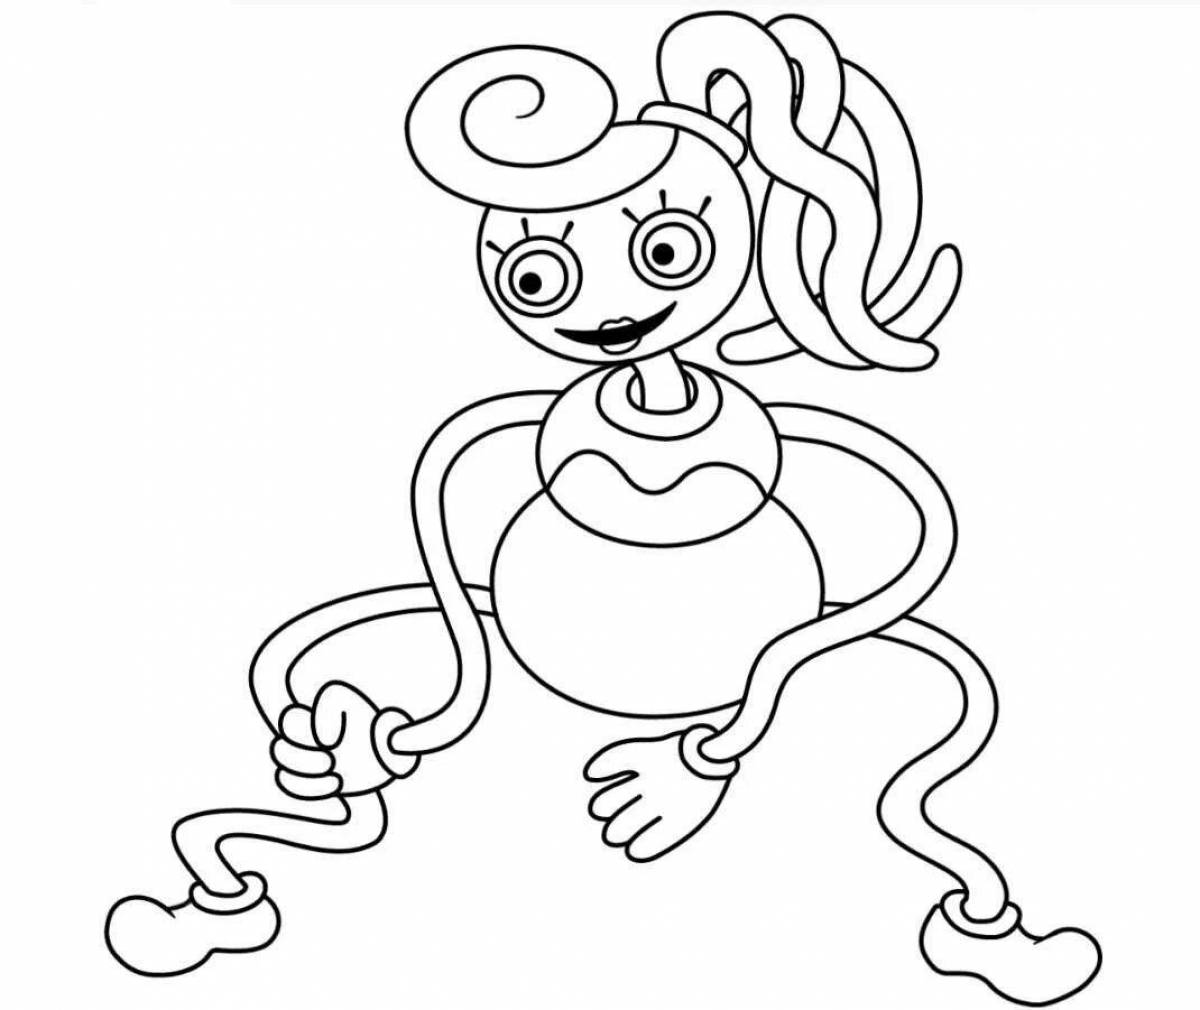 Radiant pony play time coloring page